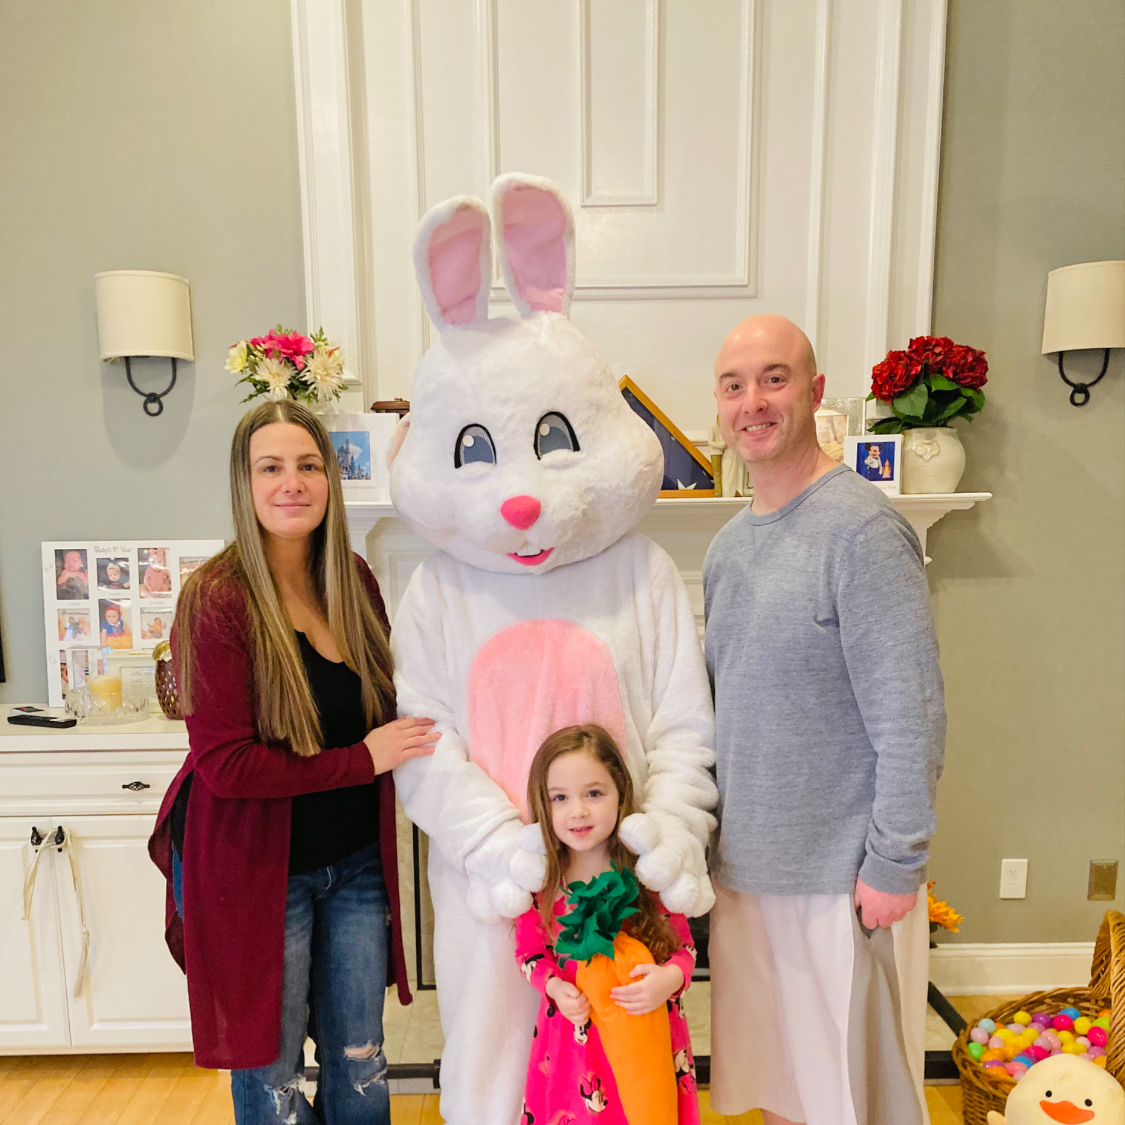 we had the "Easter Bunny" visit our home, and our digger was so excited. 